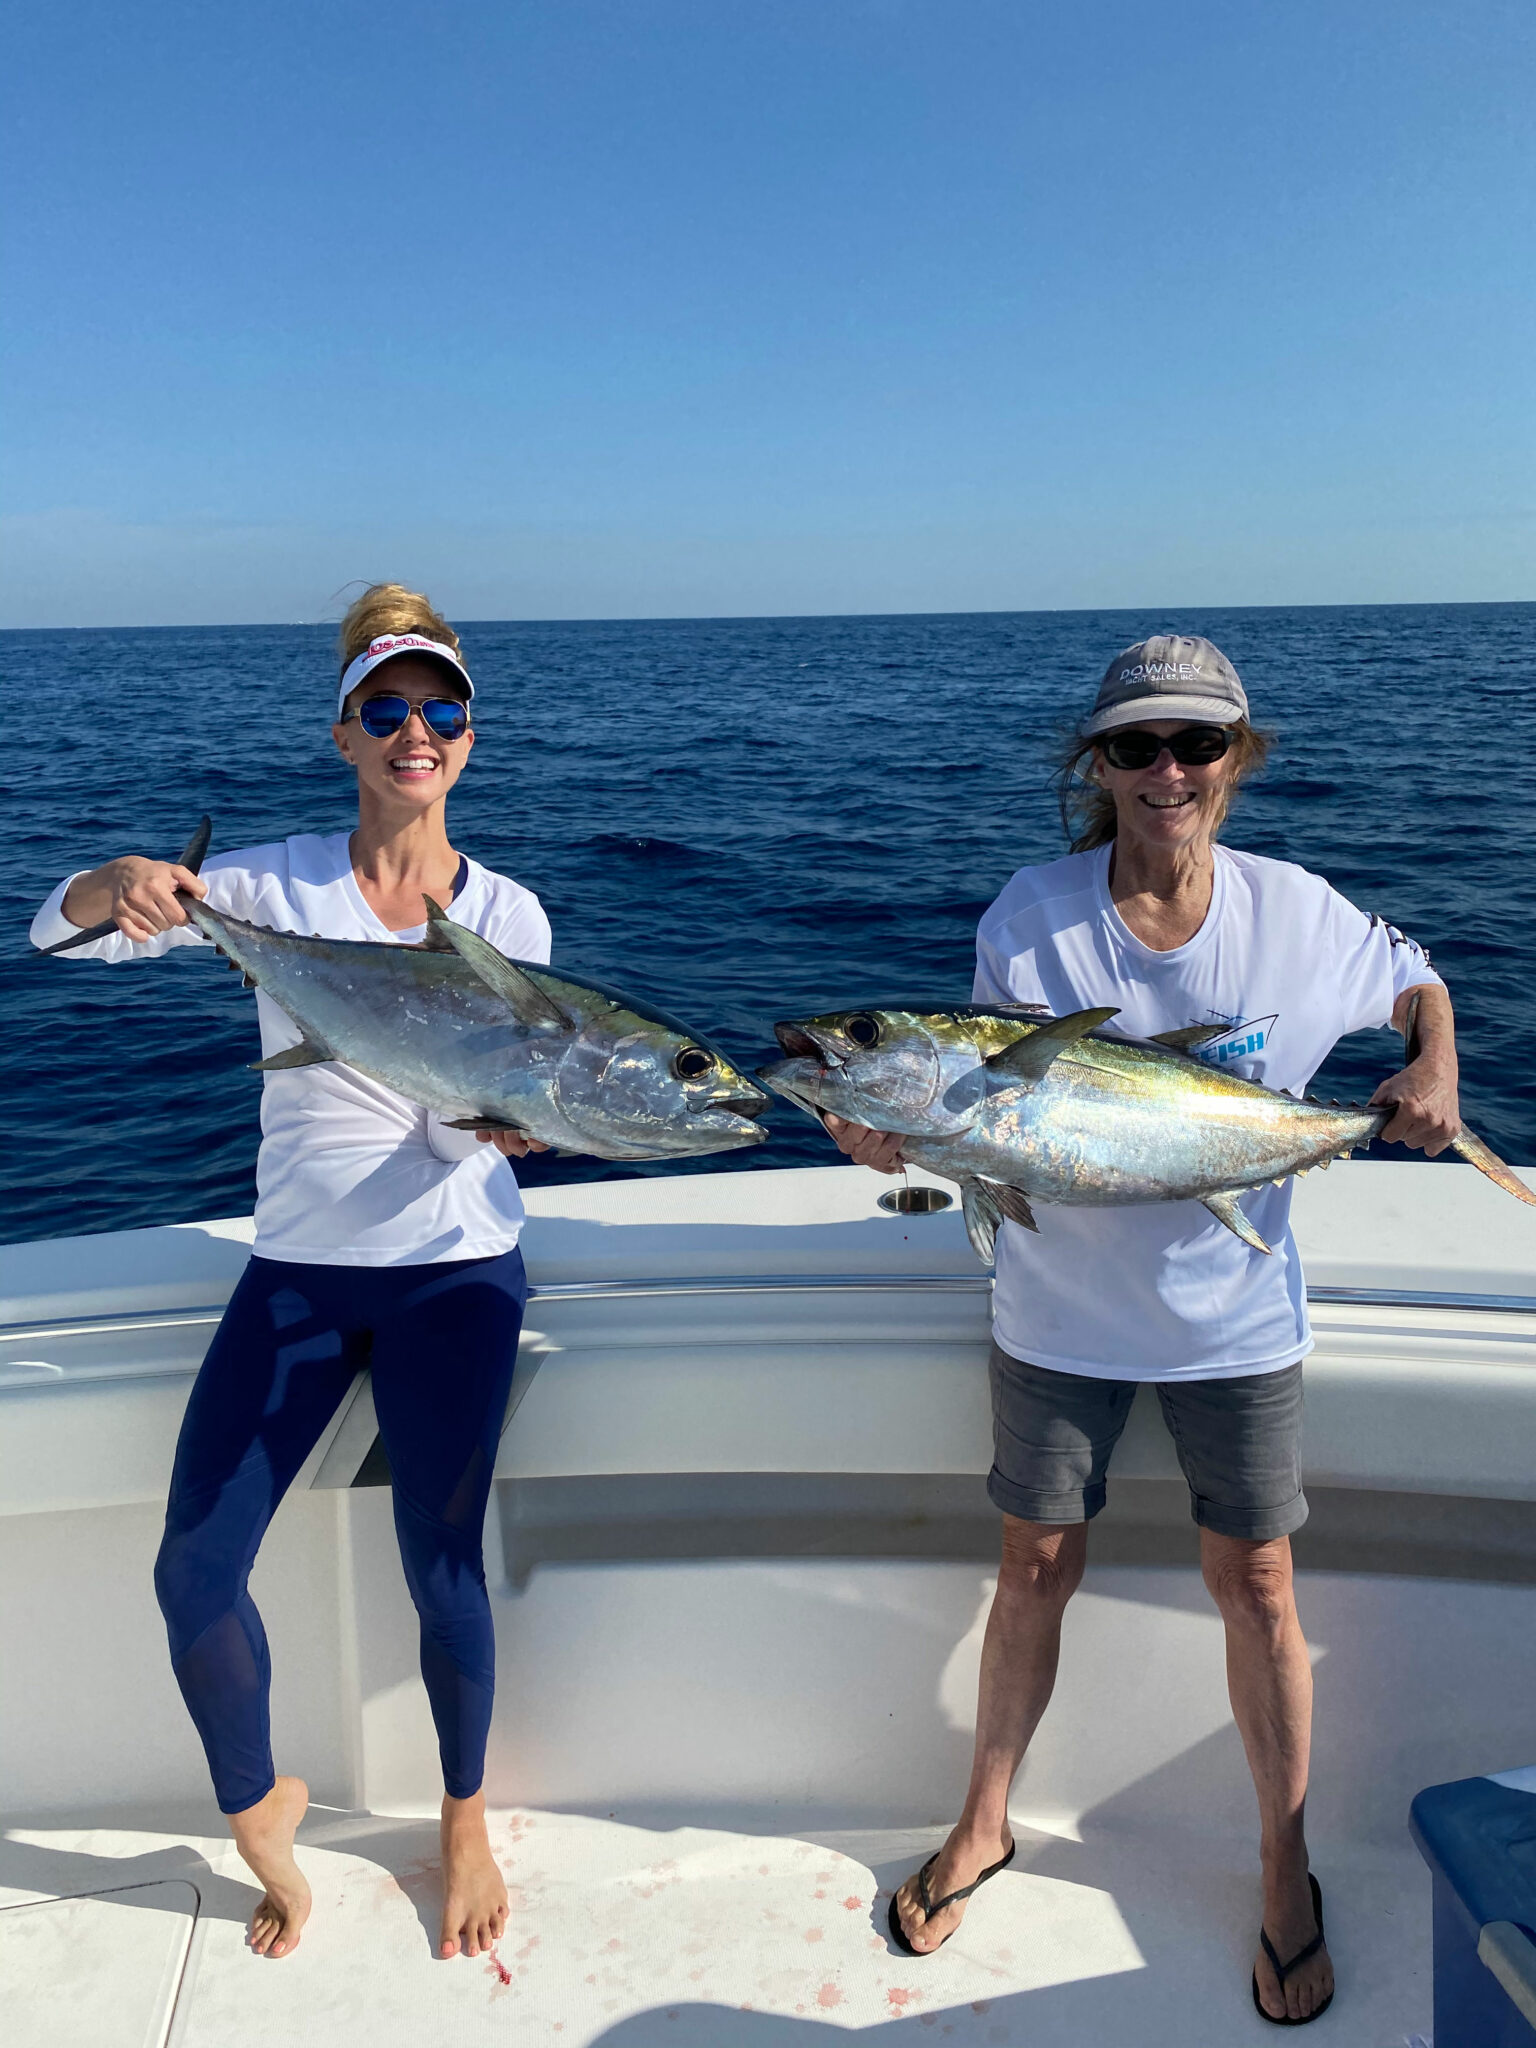 How to Find the Best Deep Sea Fishing Charter in St. Petersburg, Florida